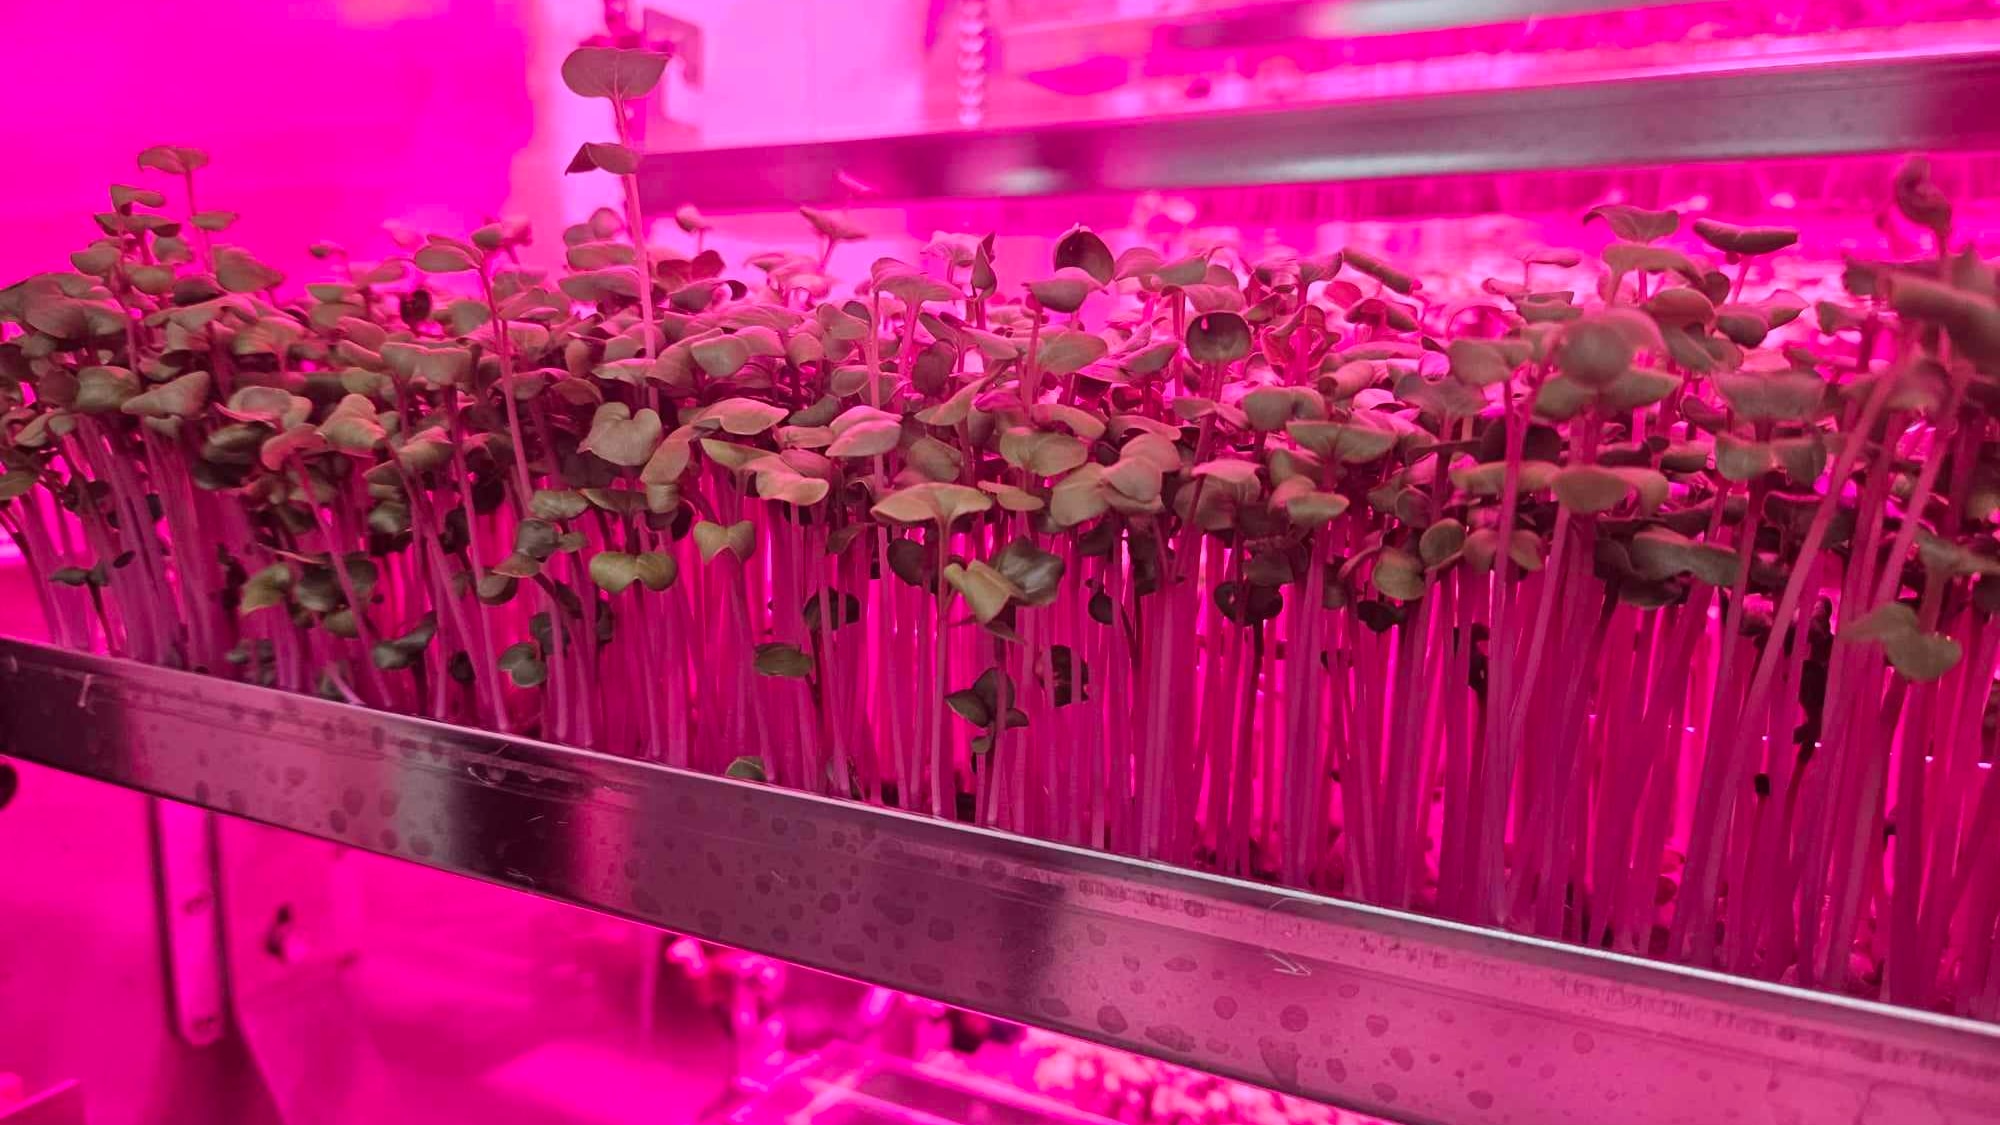 vertical farming technology could bring indigenous plants into the mainstream